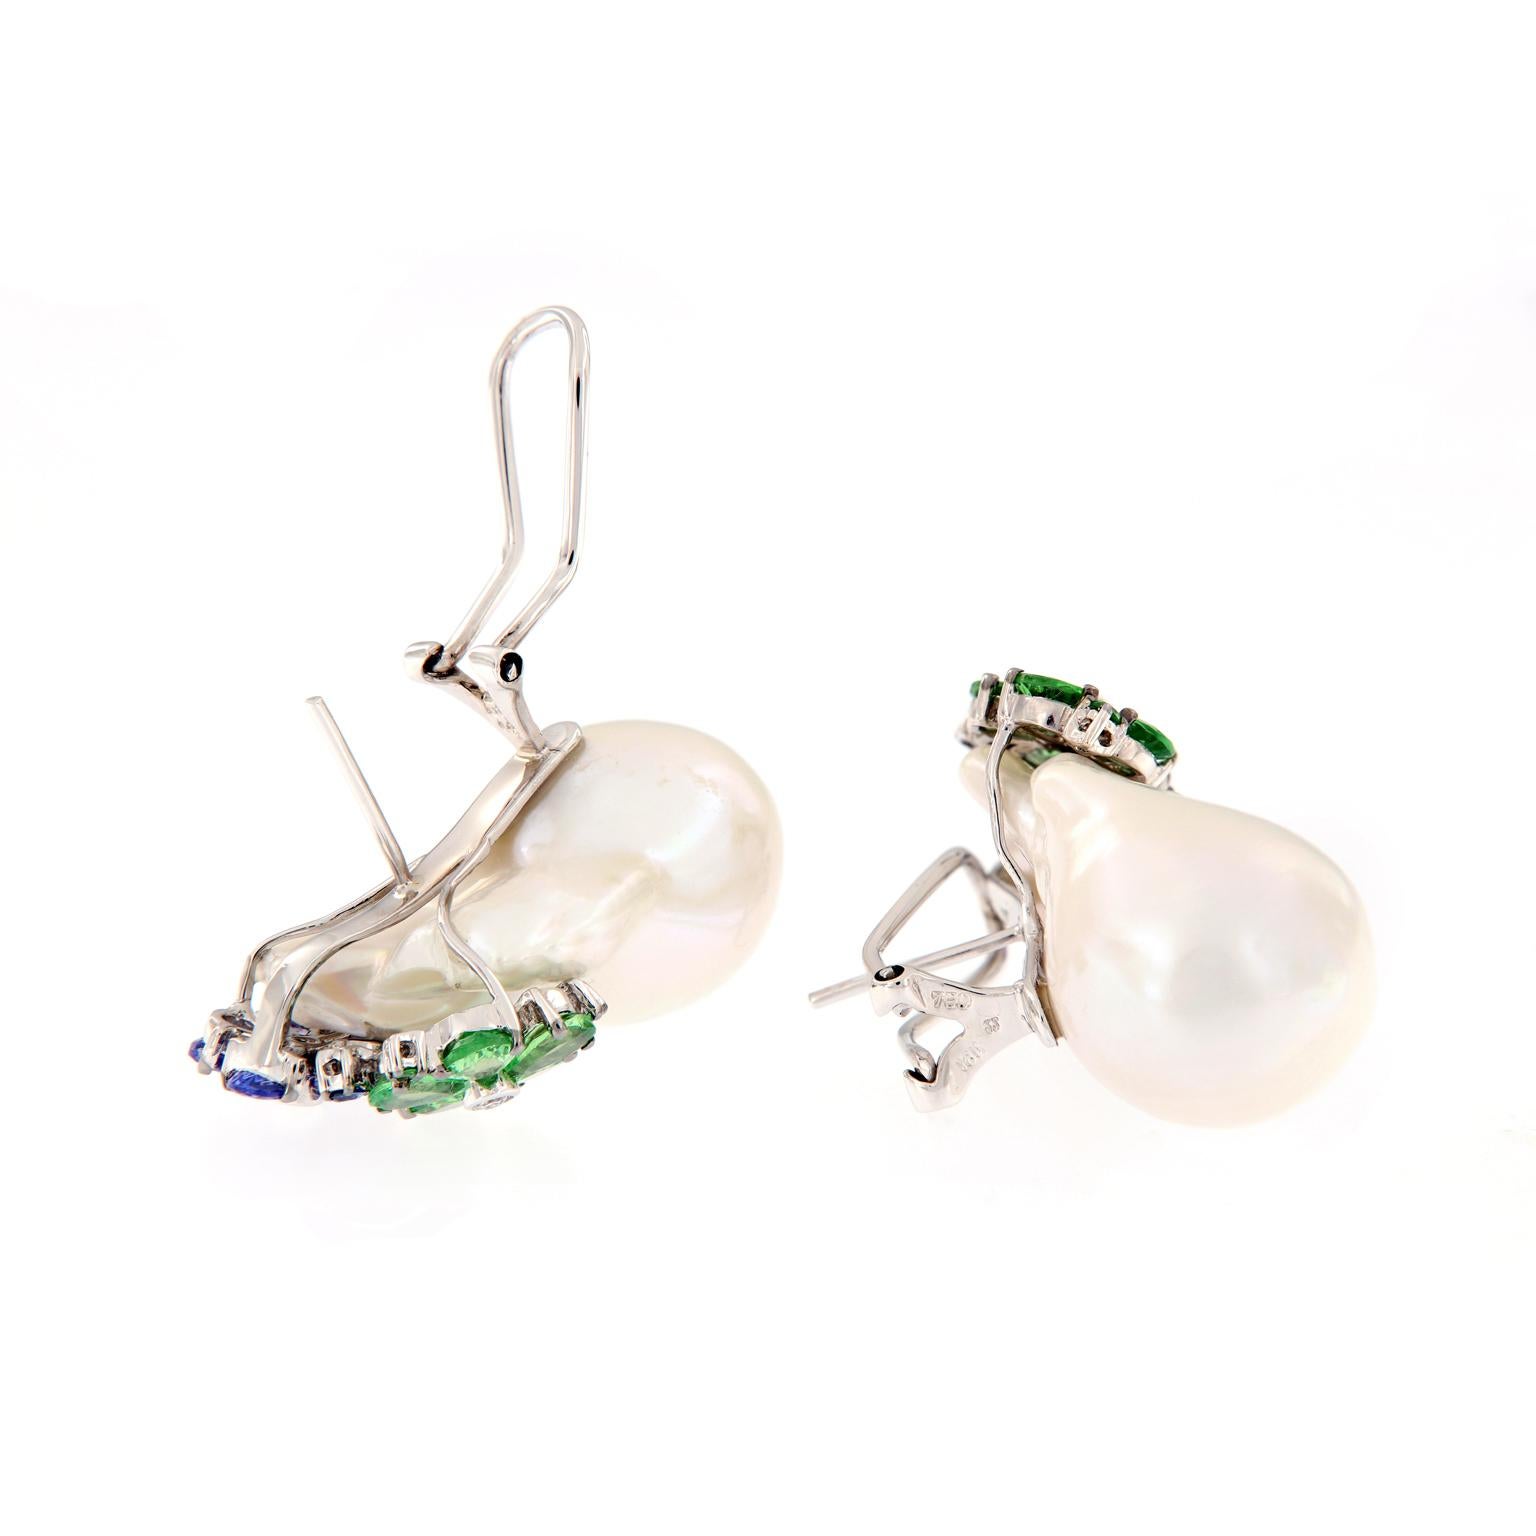 Stunning large fresh water baroque pearl earrings accented with colored gemstones flowers set in 18k white gold. Weigh 27.3 grams.

Diamonds 0.10 cttw
Colored Gems 4.67 cttw